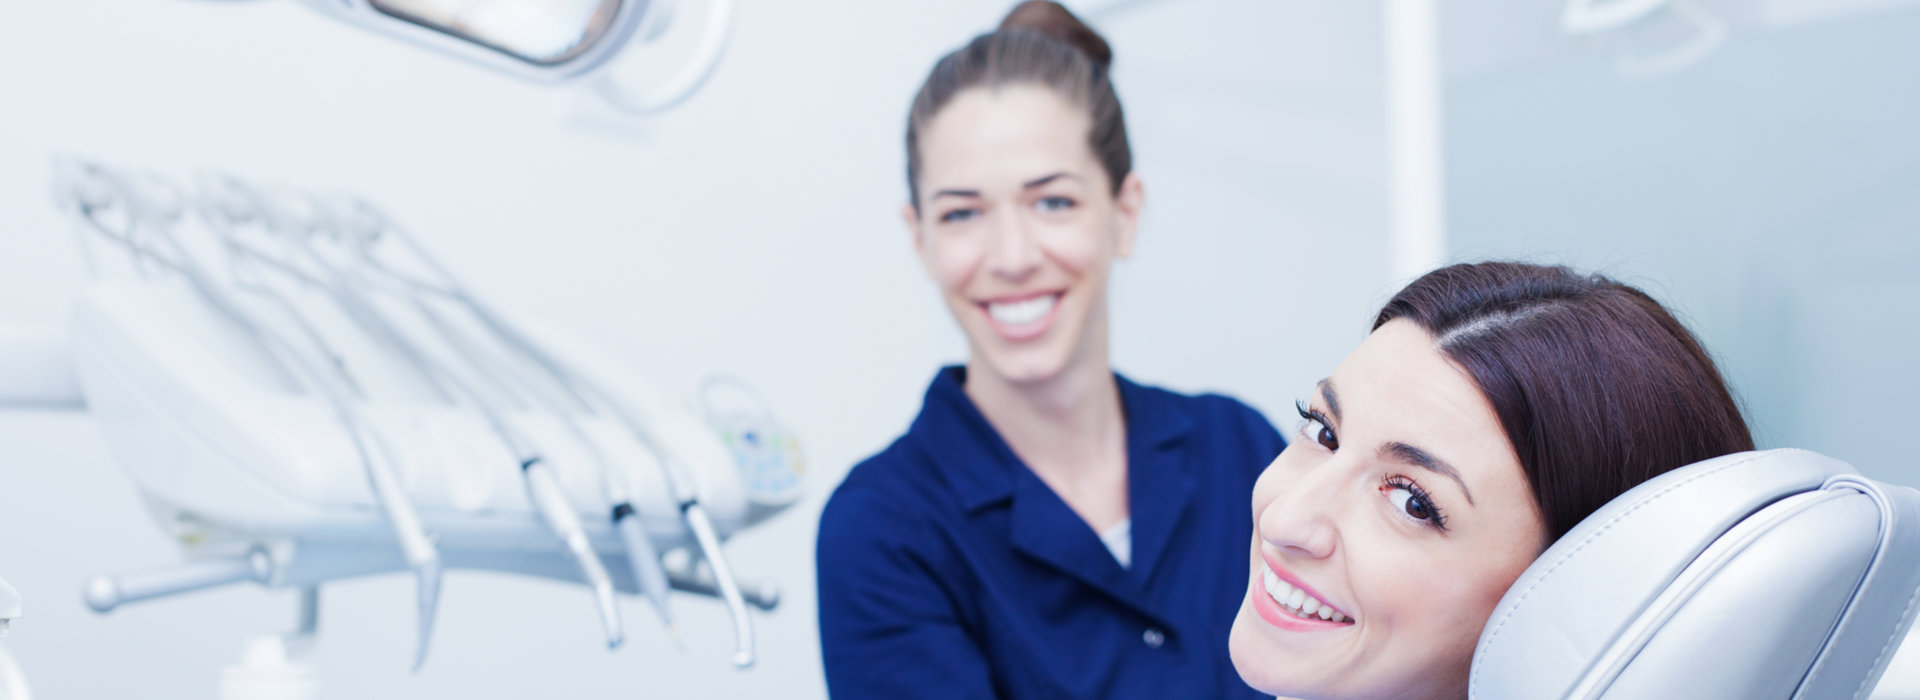 A woman and dentist smiling during a dental appointment.